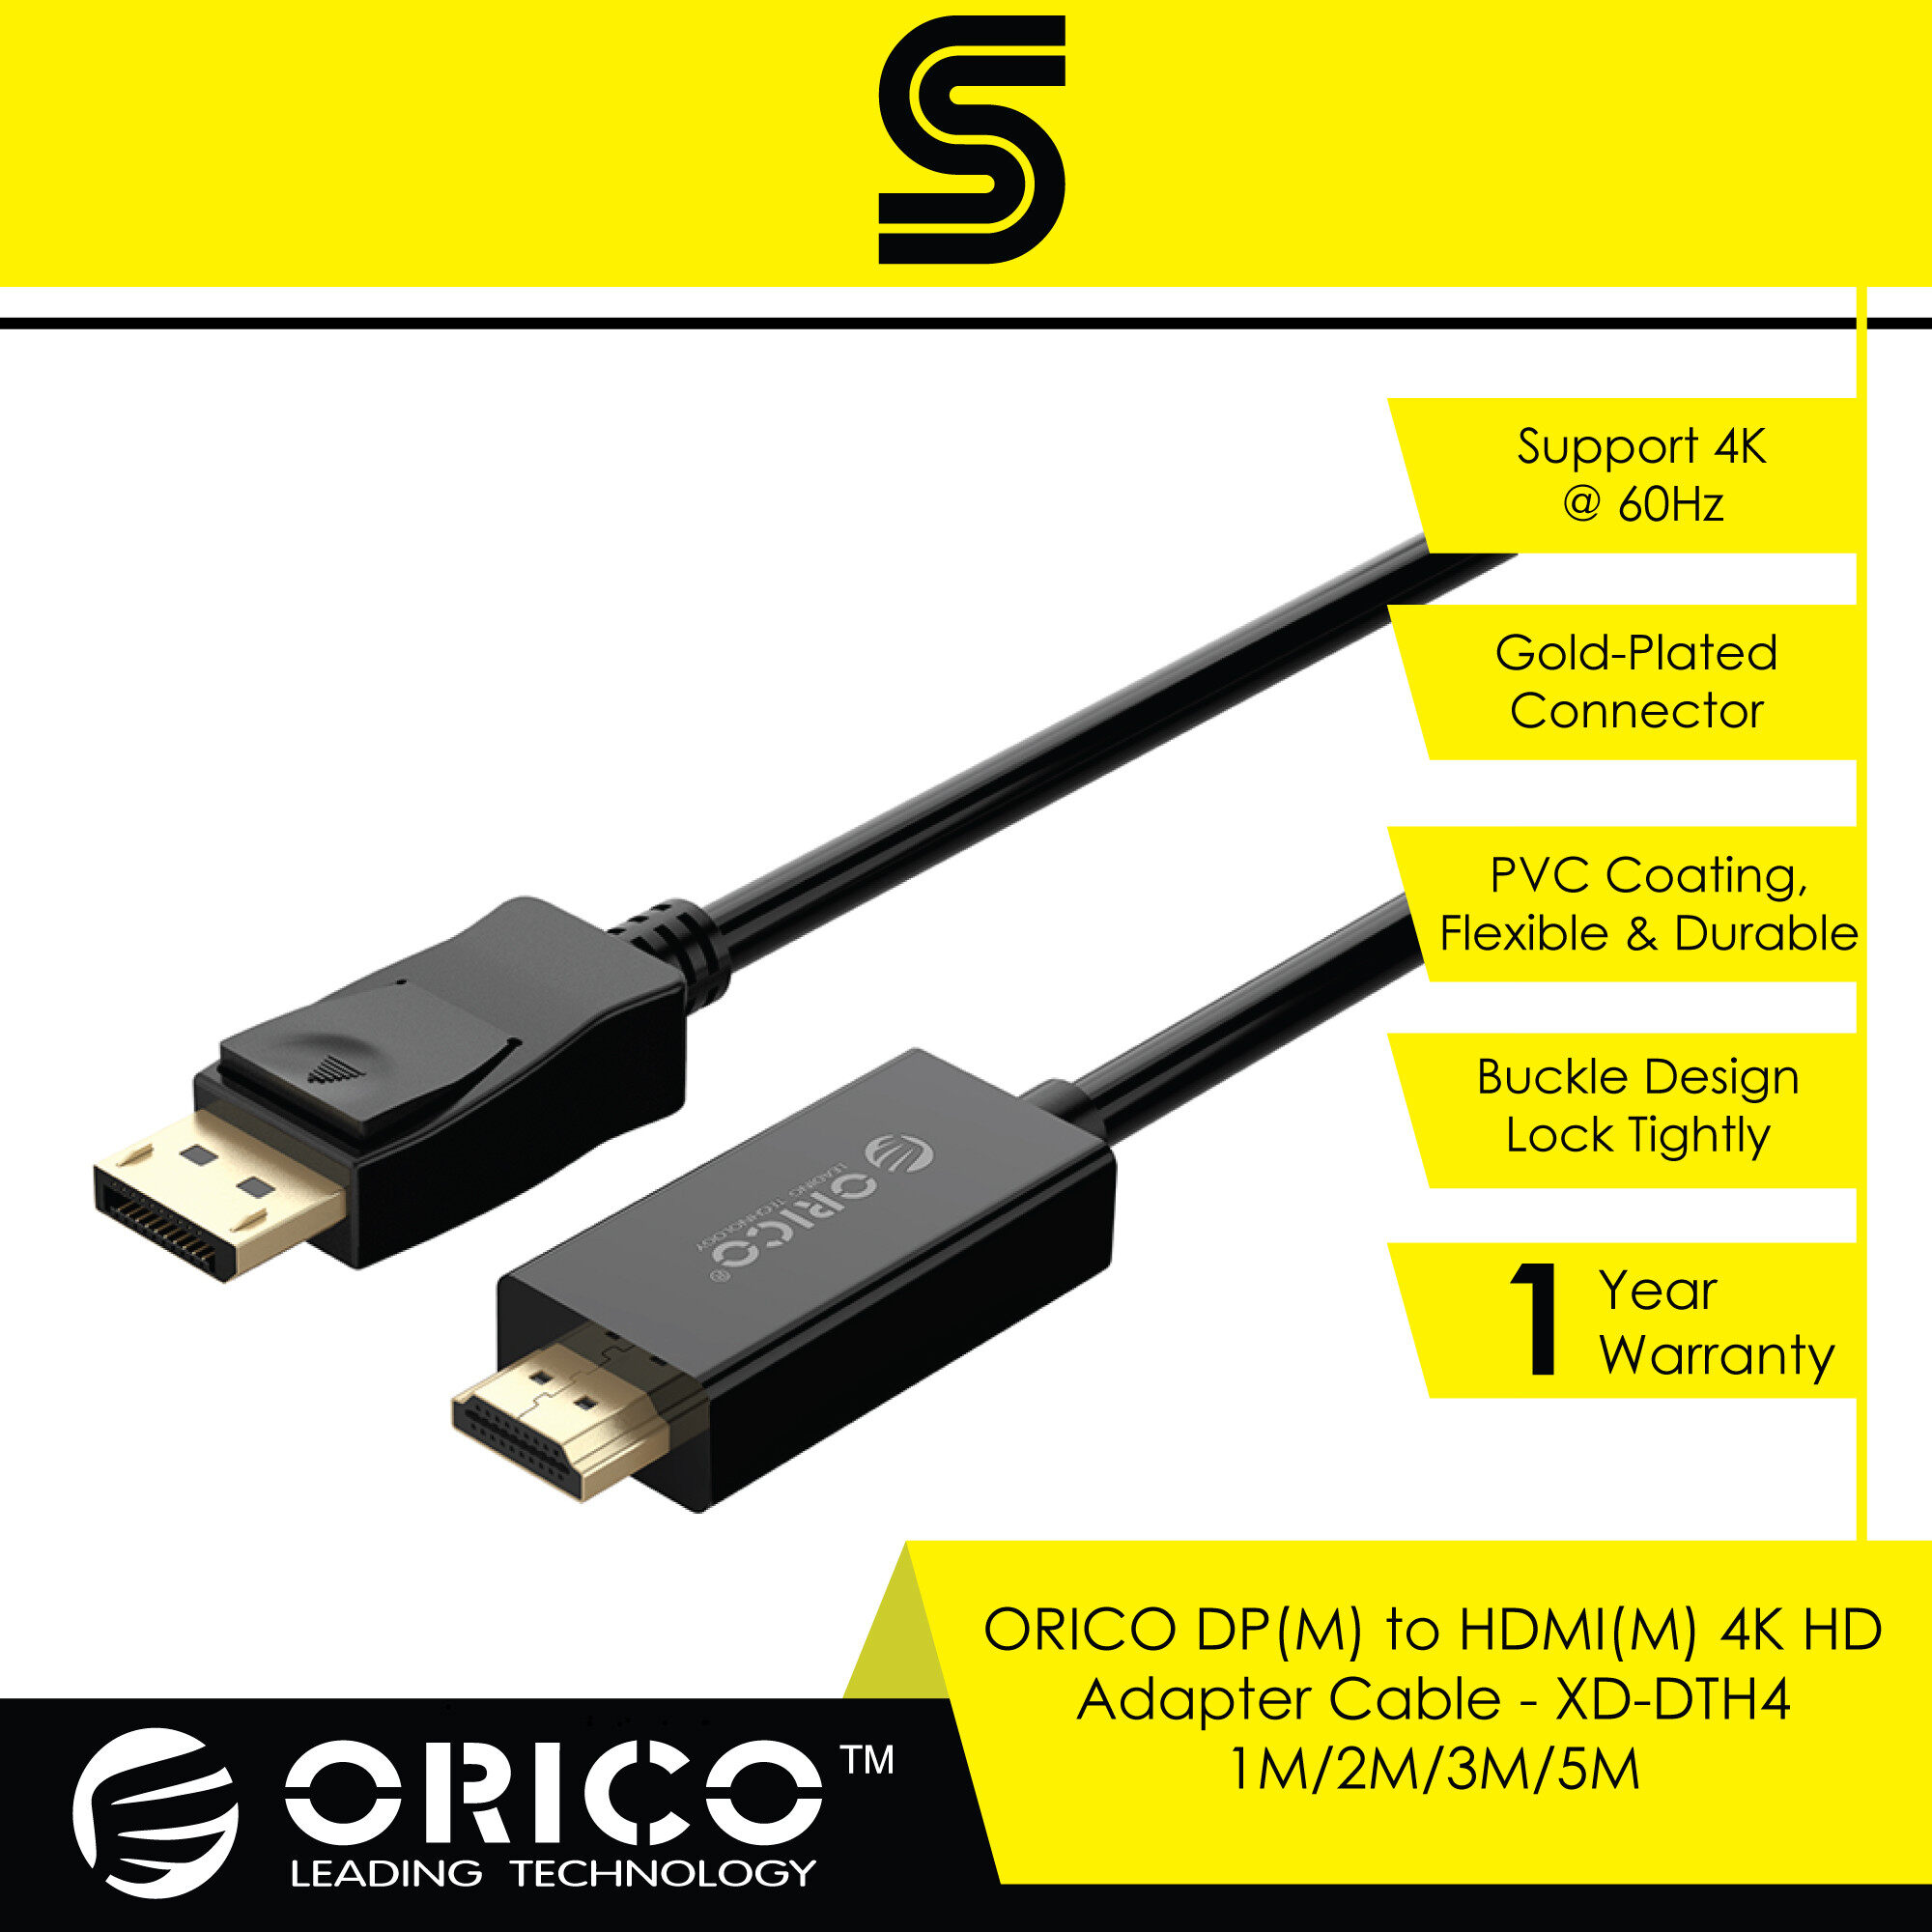 ORICO DP(M) to HDMI(M) 4K HD Adapter Cable XD-DTH4 - 1M/2M/3M/5M